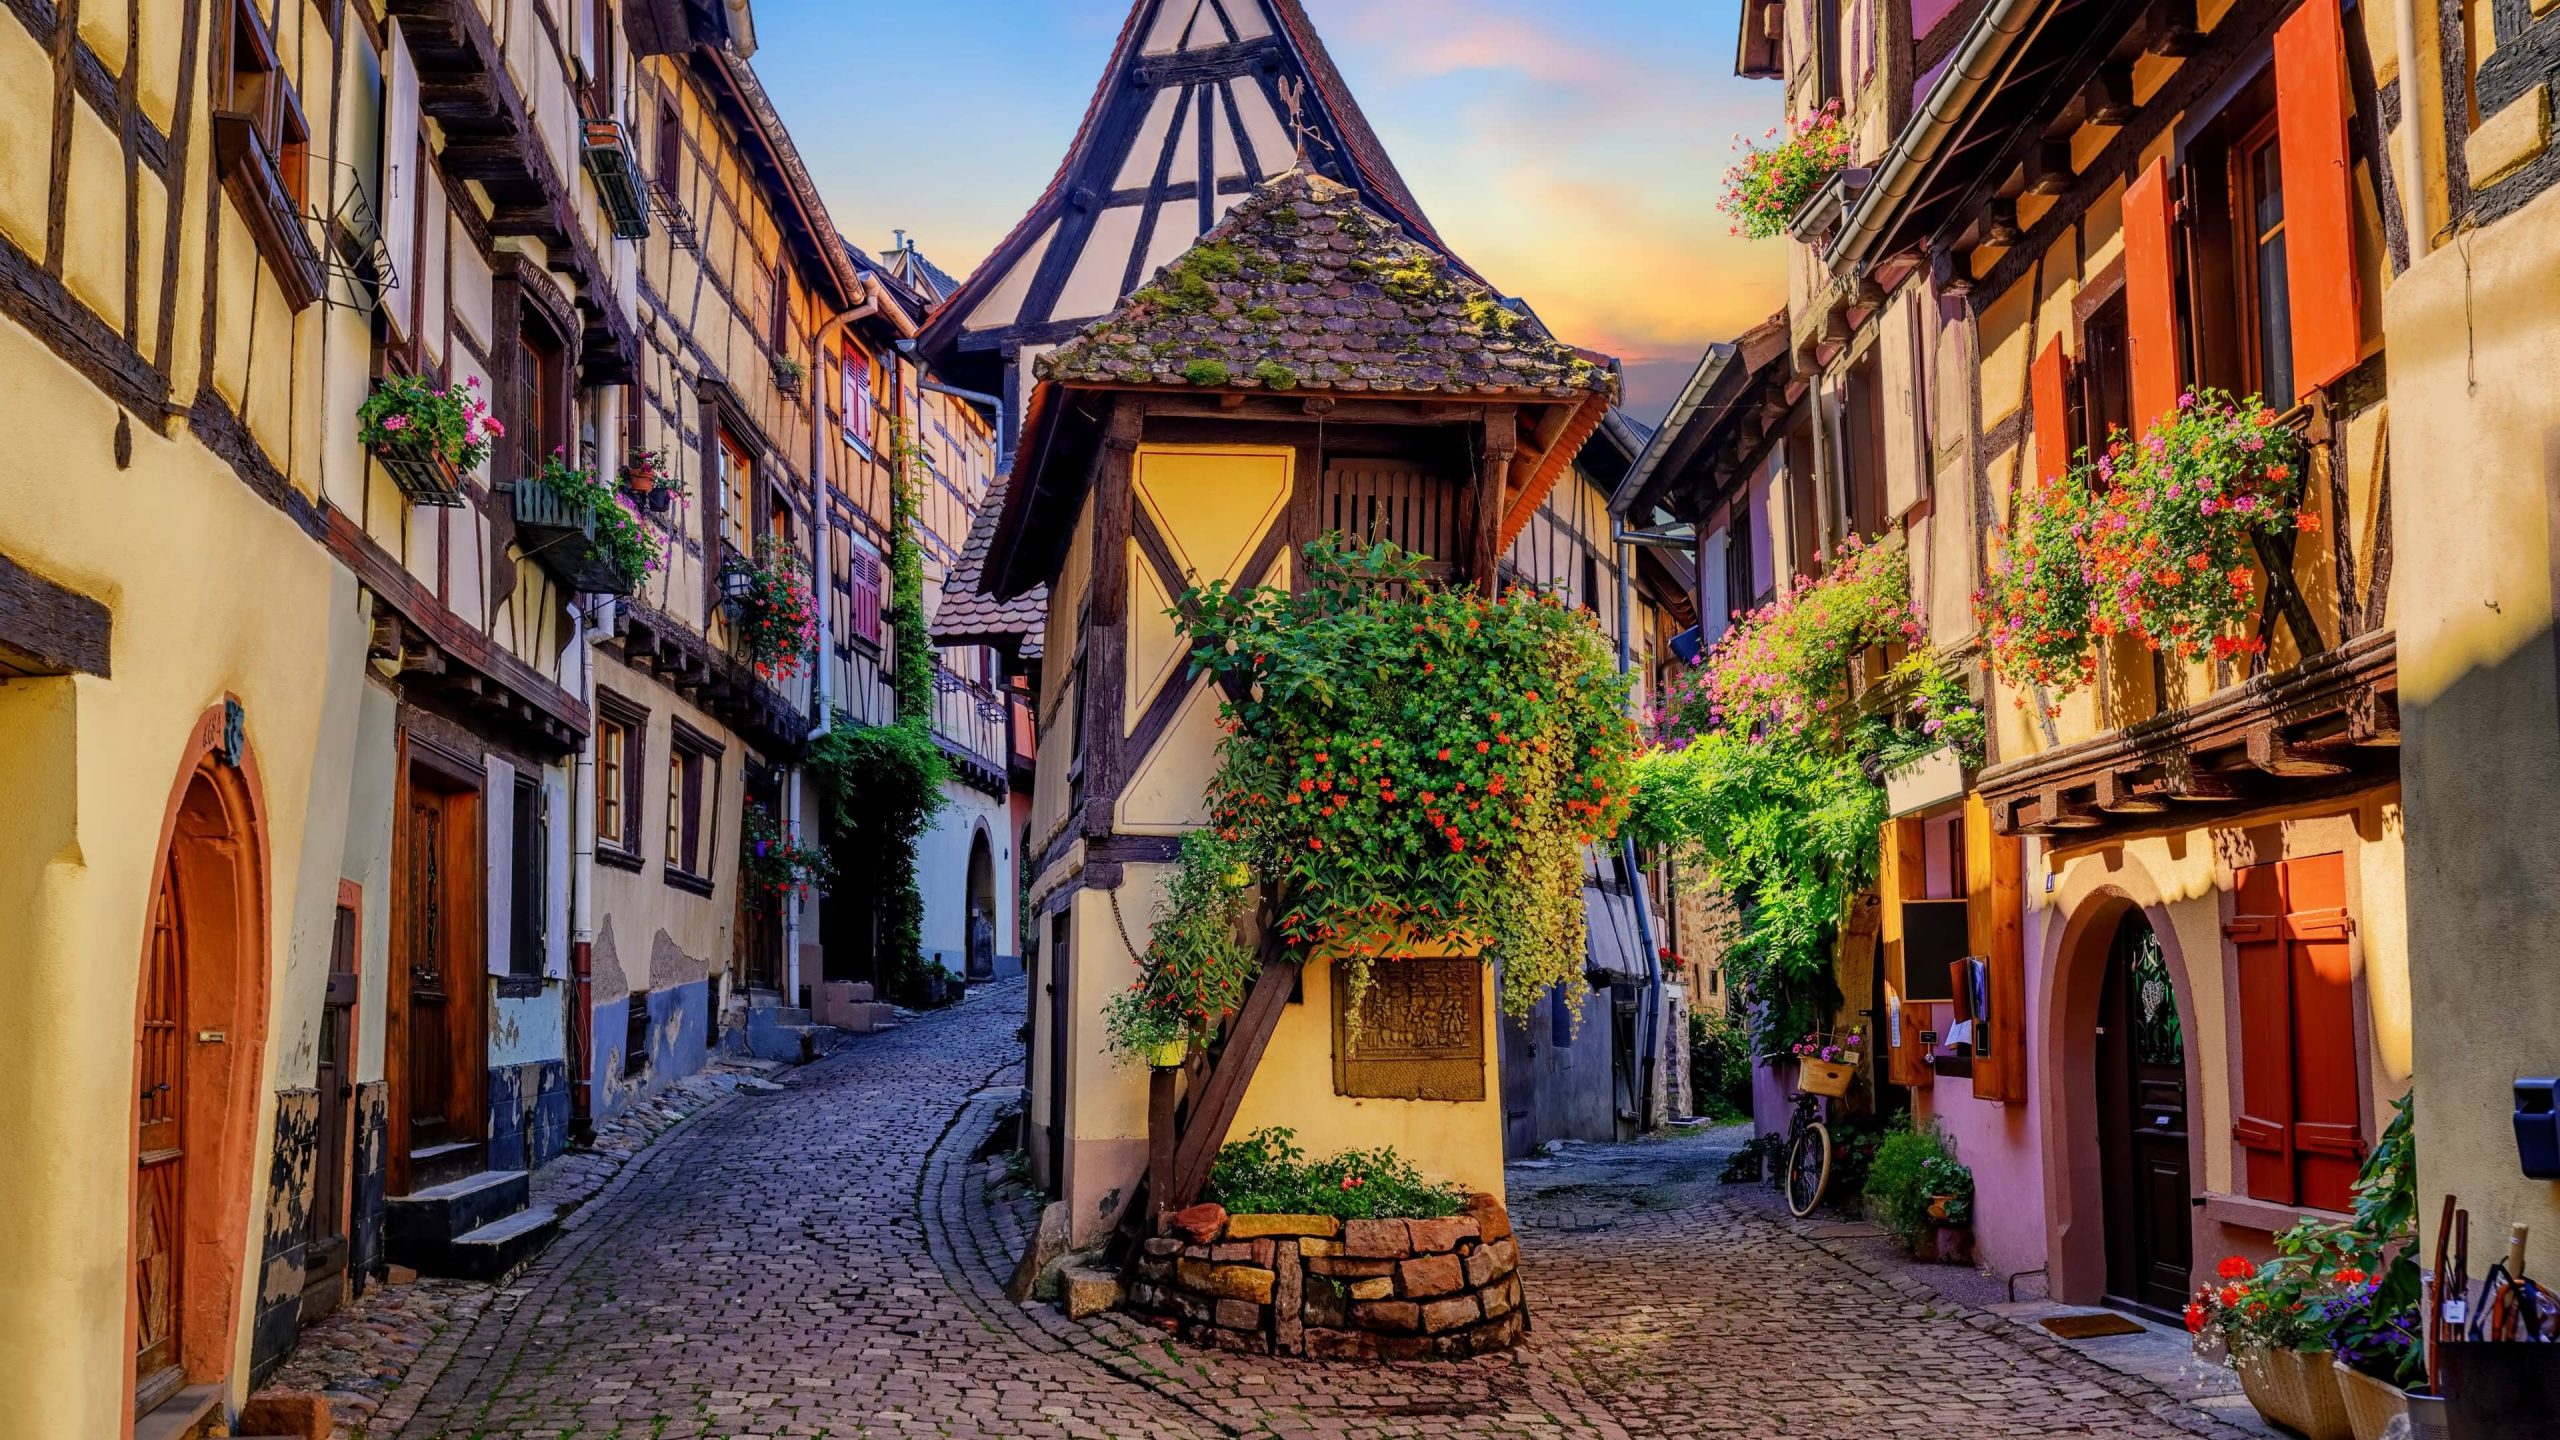 One of the fairy-tale places in the Alsace Region of France